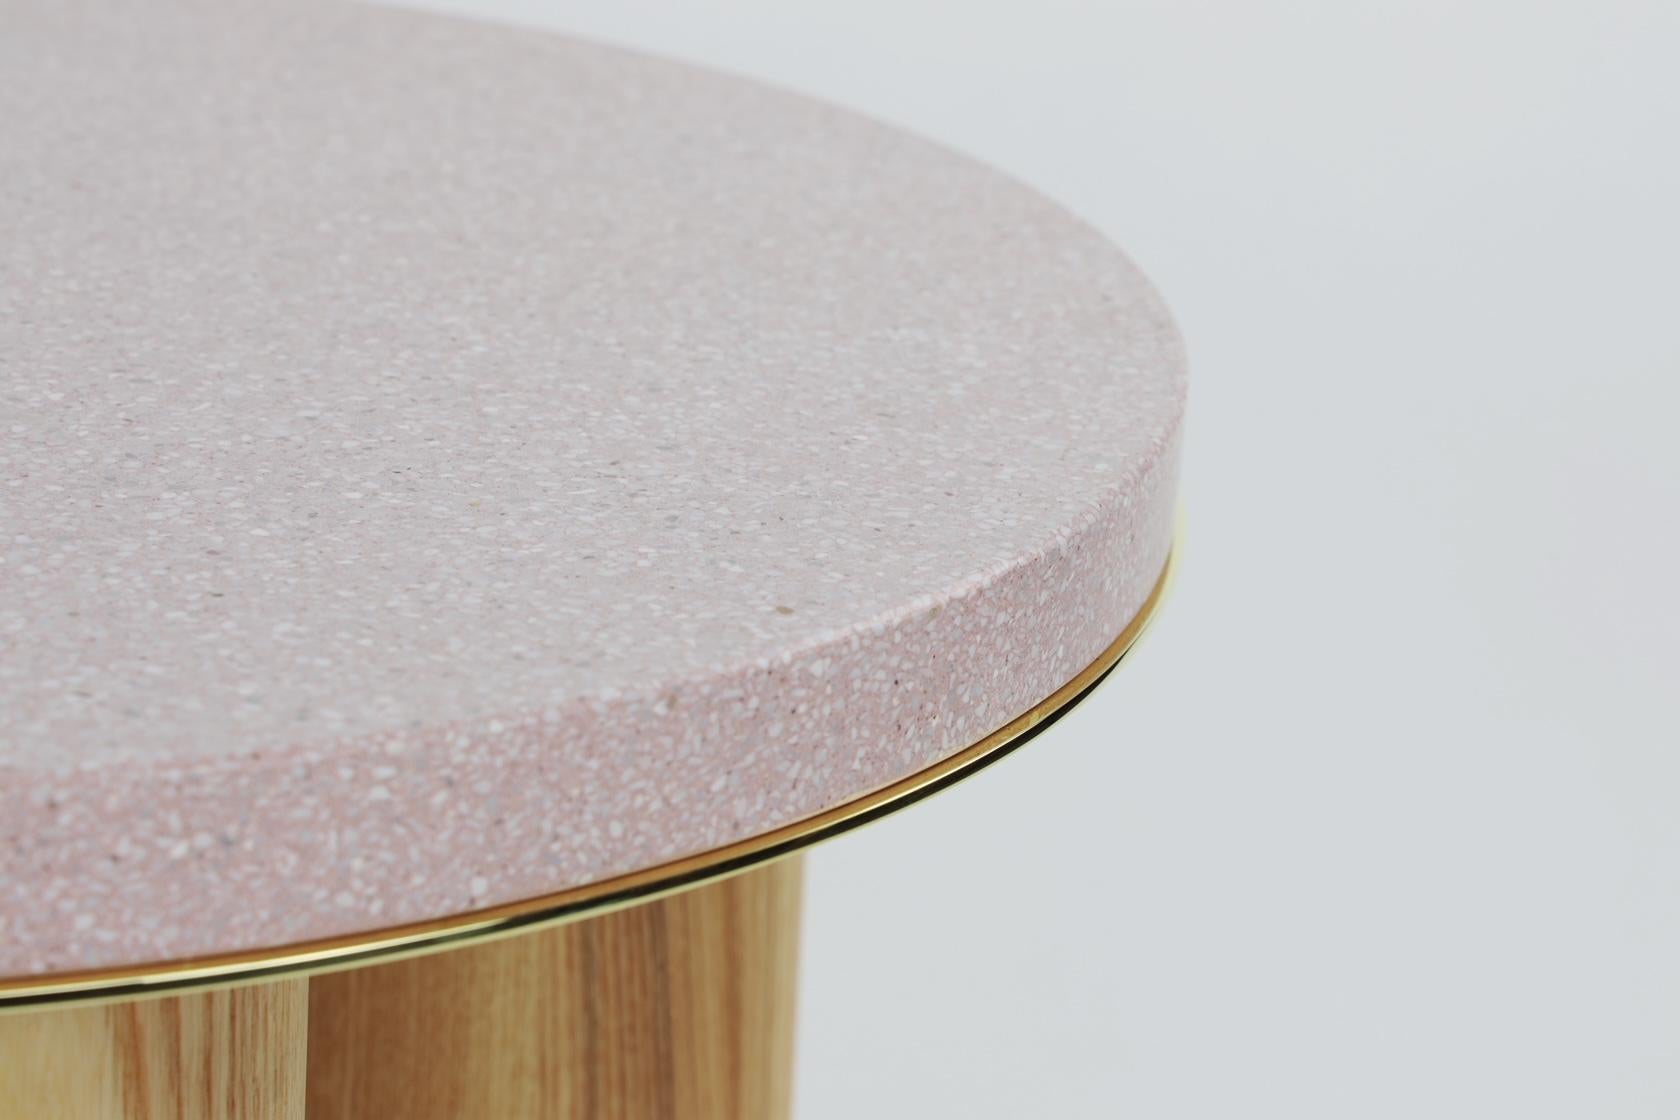 Polished Crazy Legs Table w/ Terrazzo Top and Alder Wood Legs by Christopher Kreiling For Sale